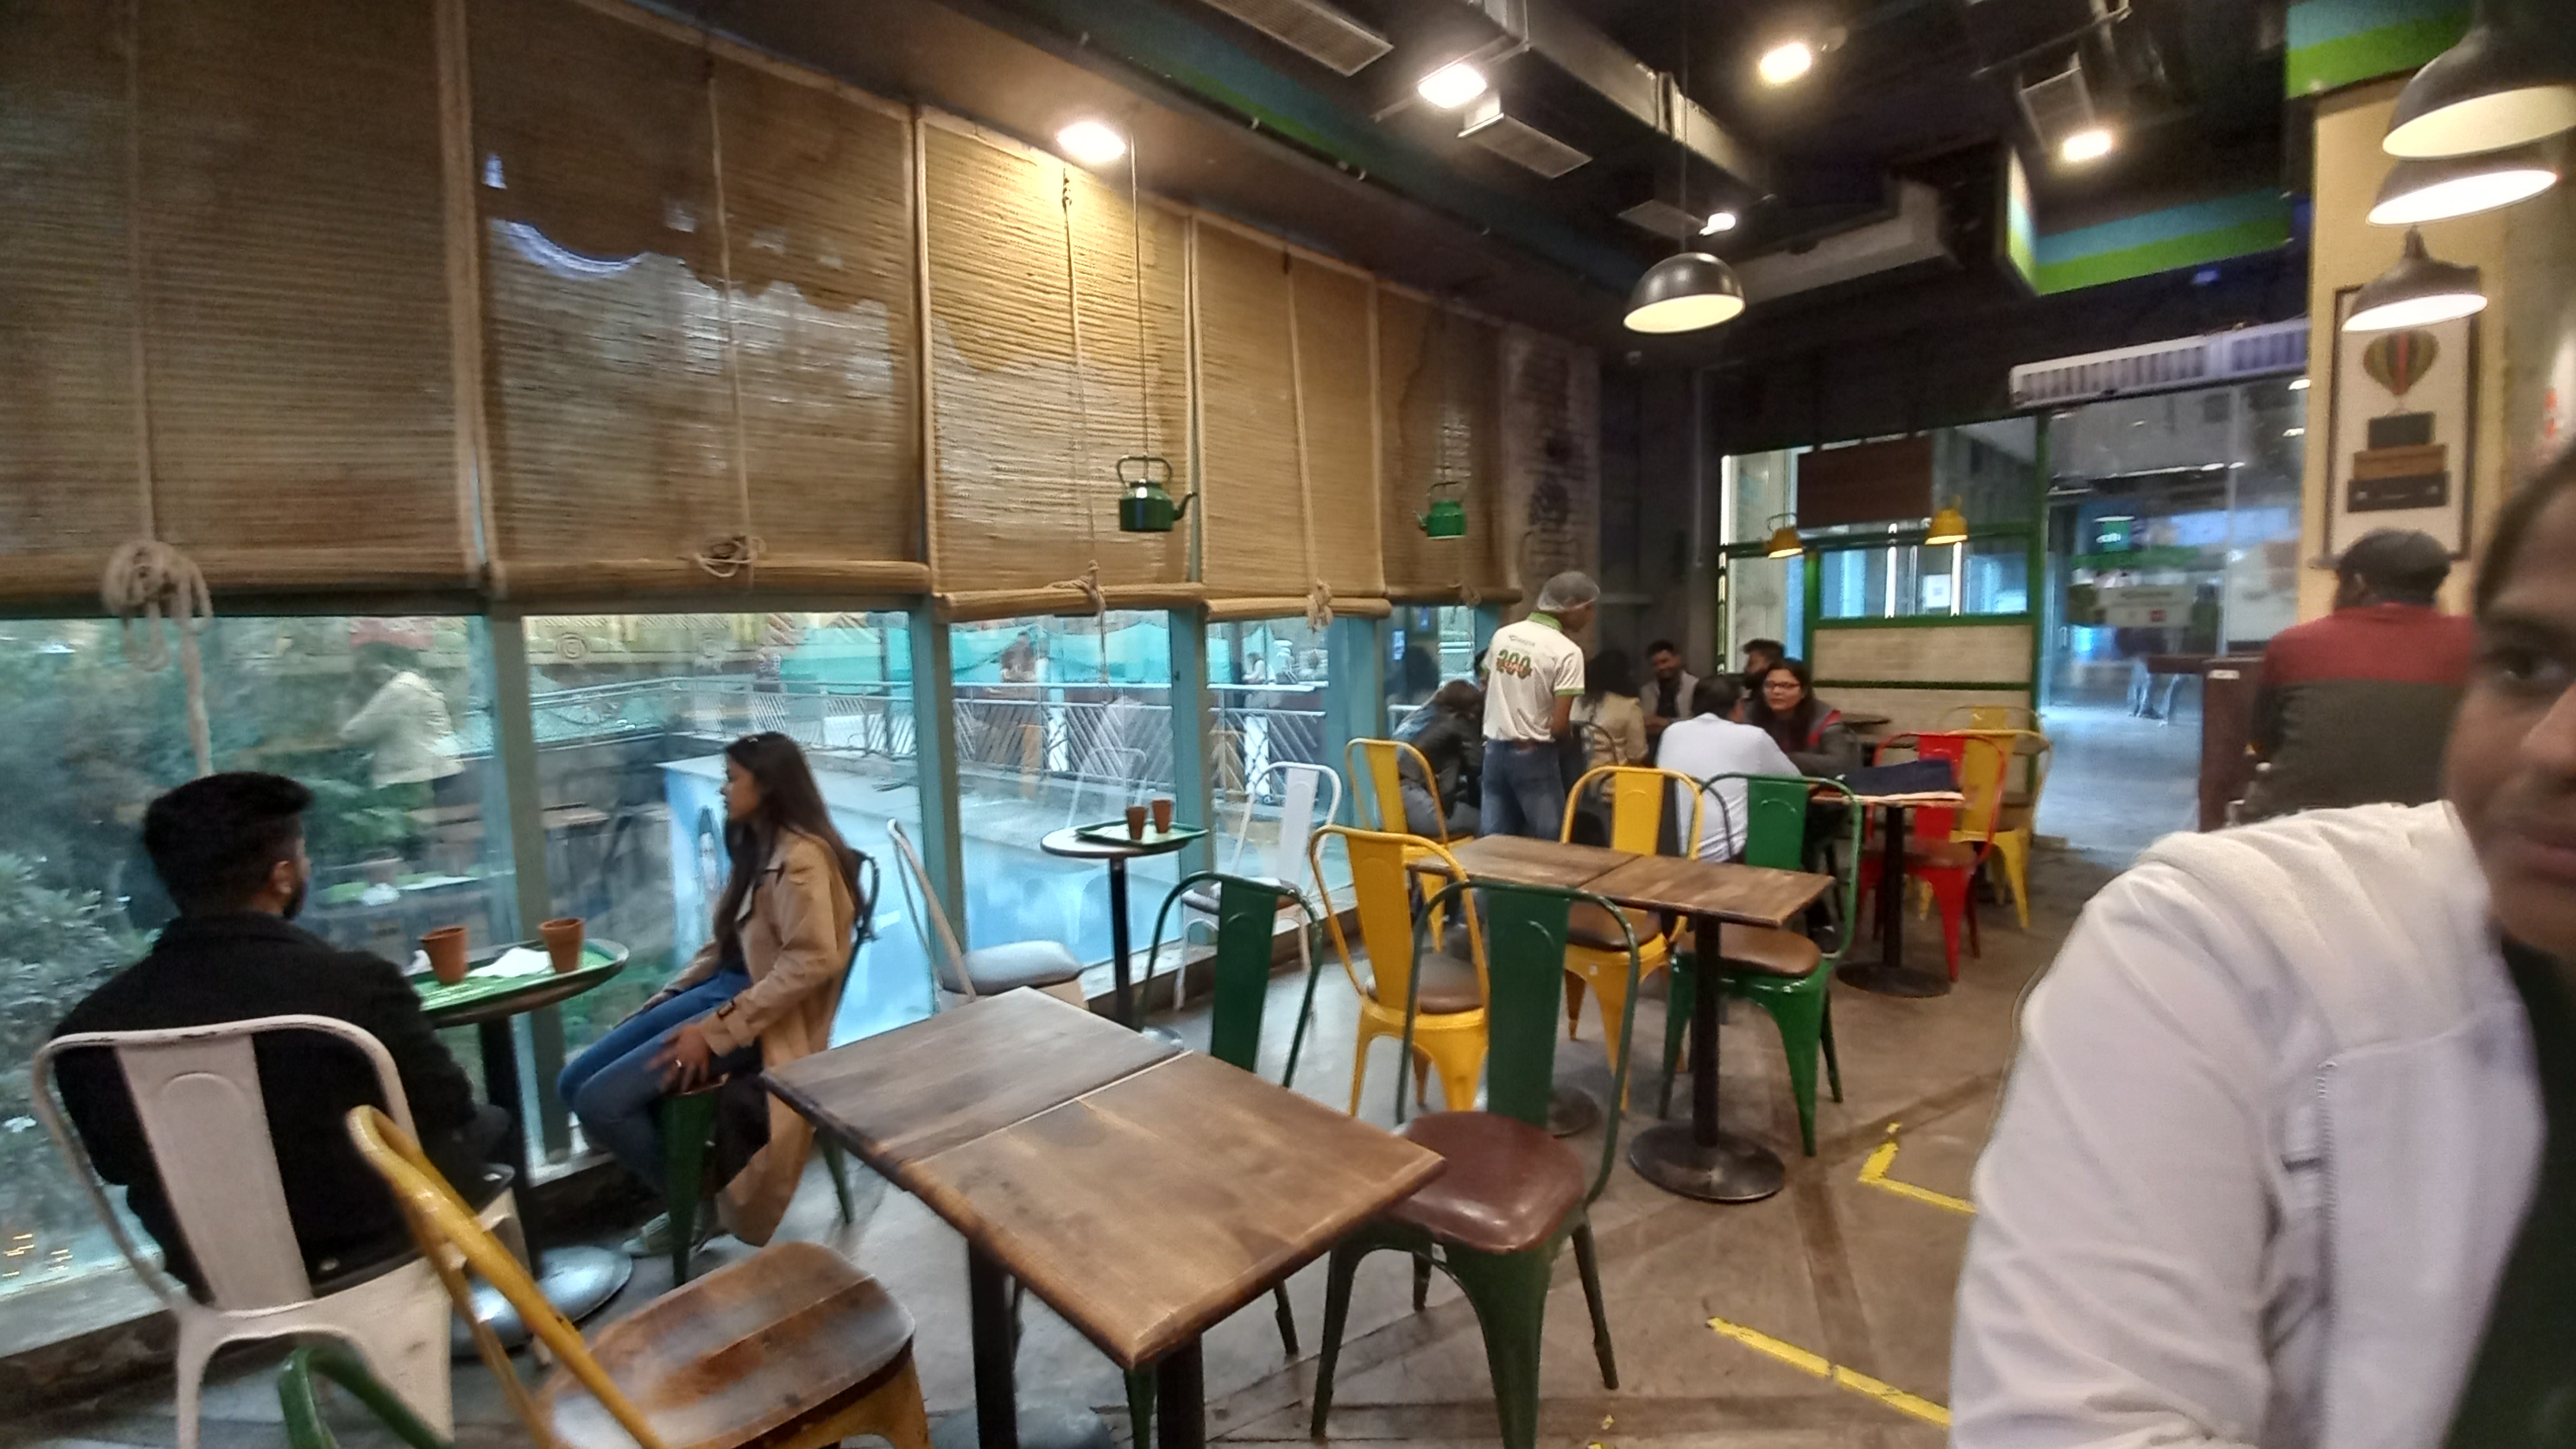 Chaayos Cafe - Nehru Place, Metro Station